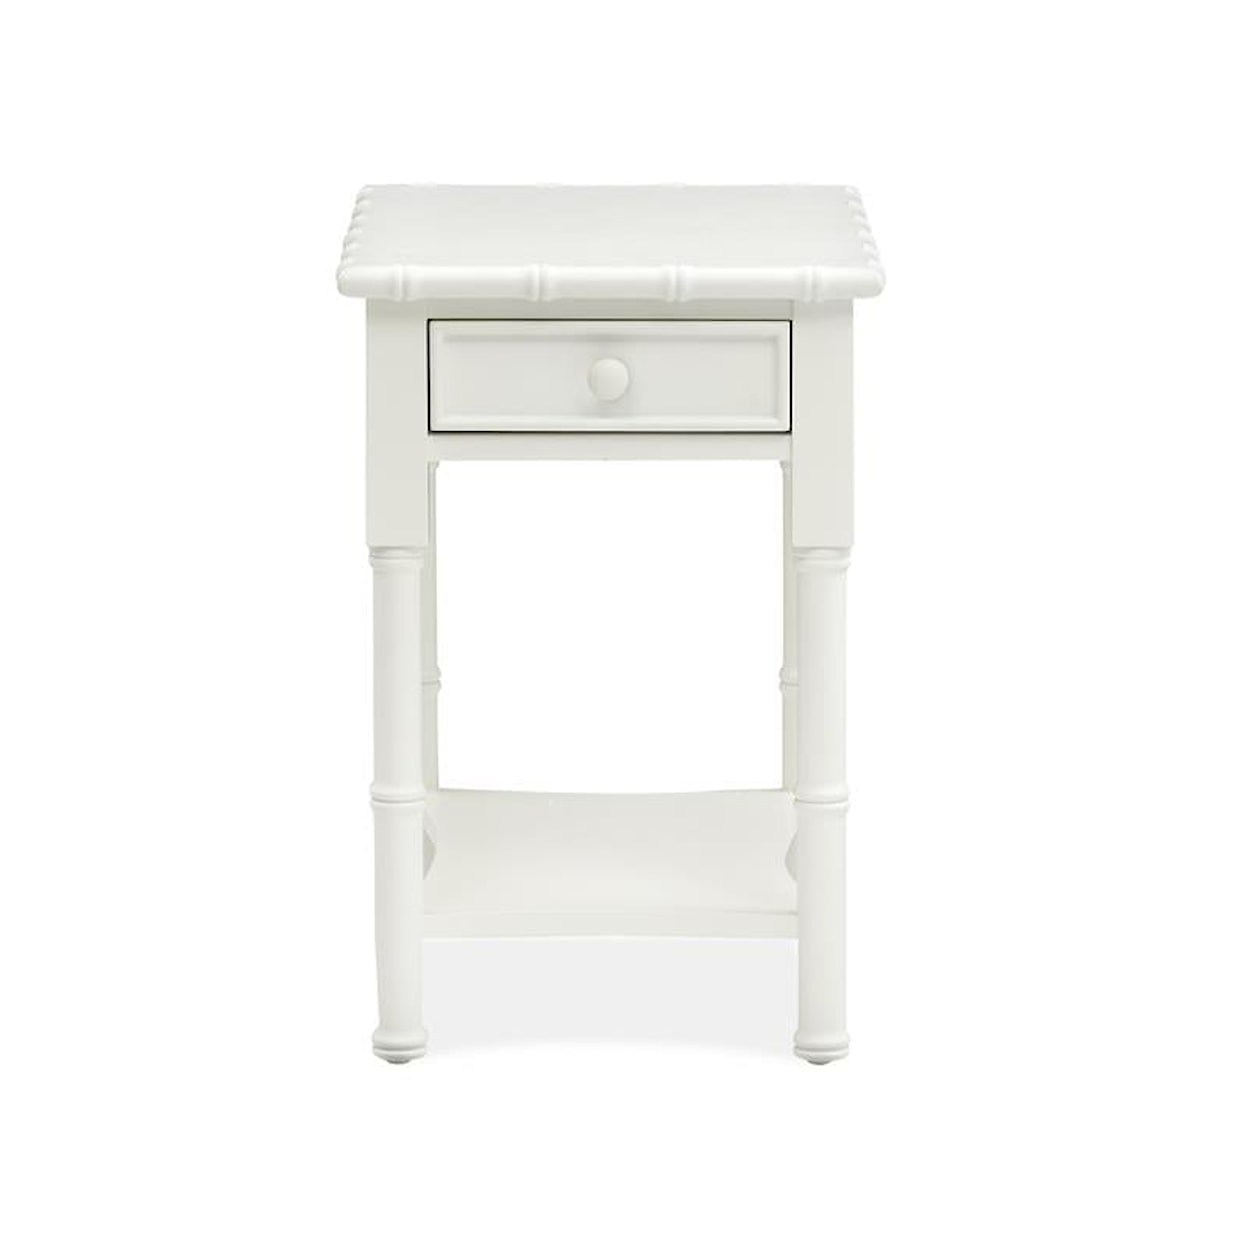 Magnussen Home Mosaic - A6005 Chairside End Table